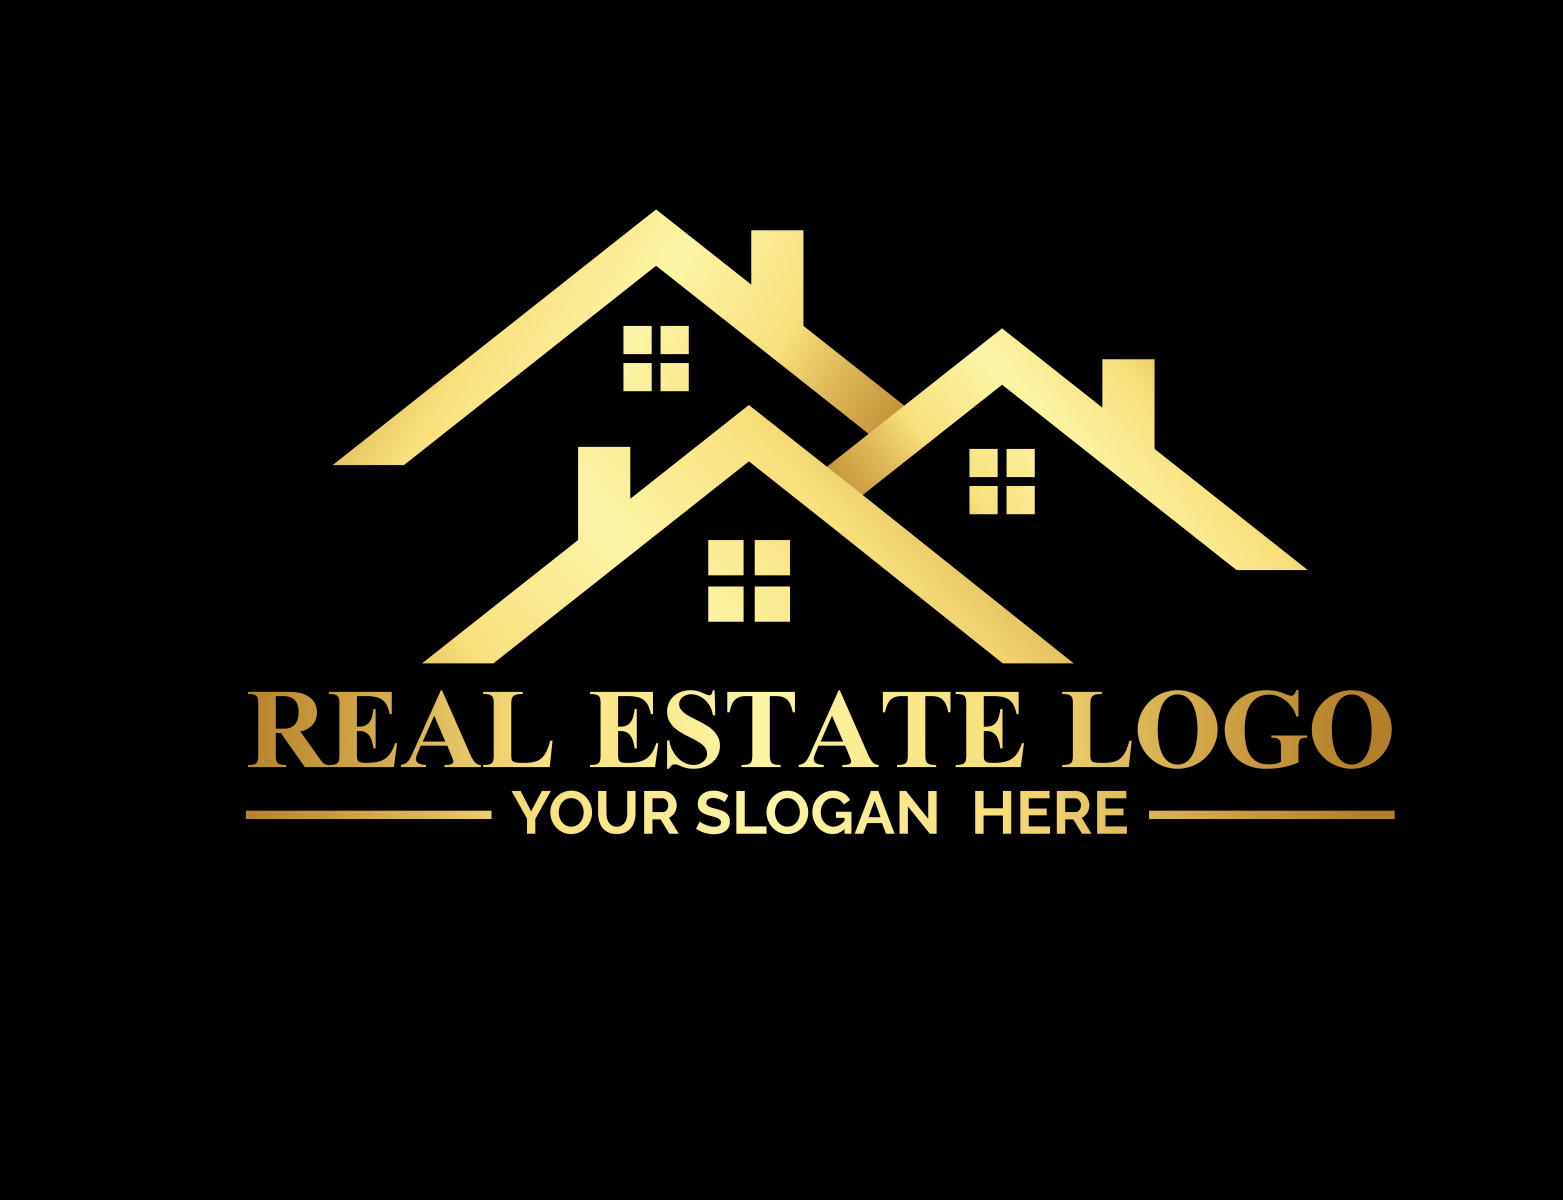 Real Estate Property Mortgage Home Building Logo by Shifat_Sarkar on ...